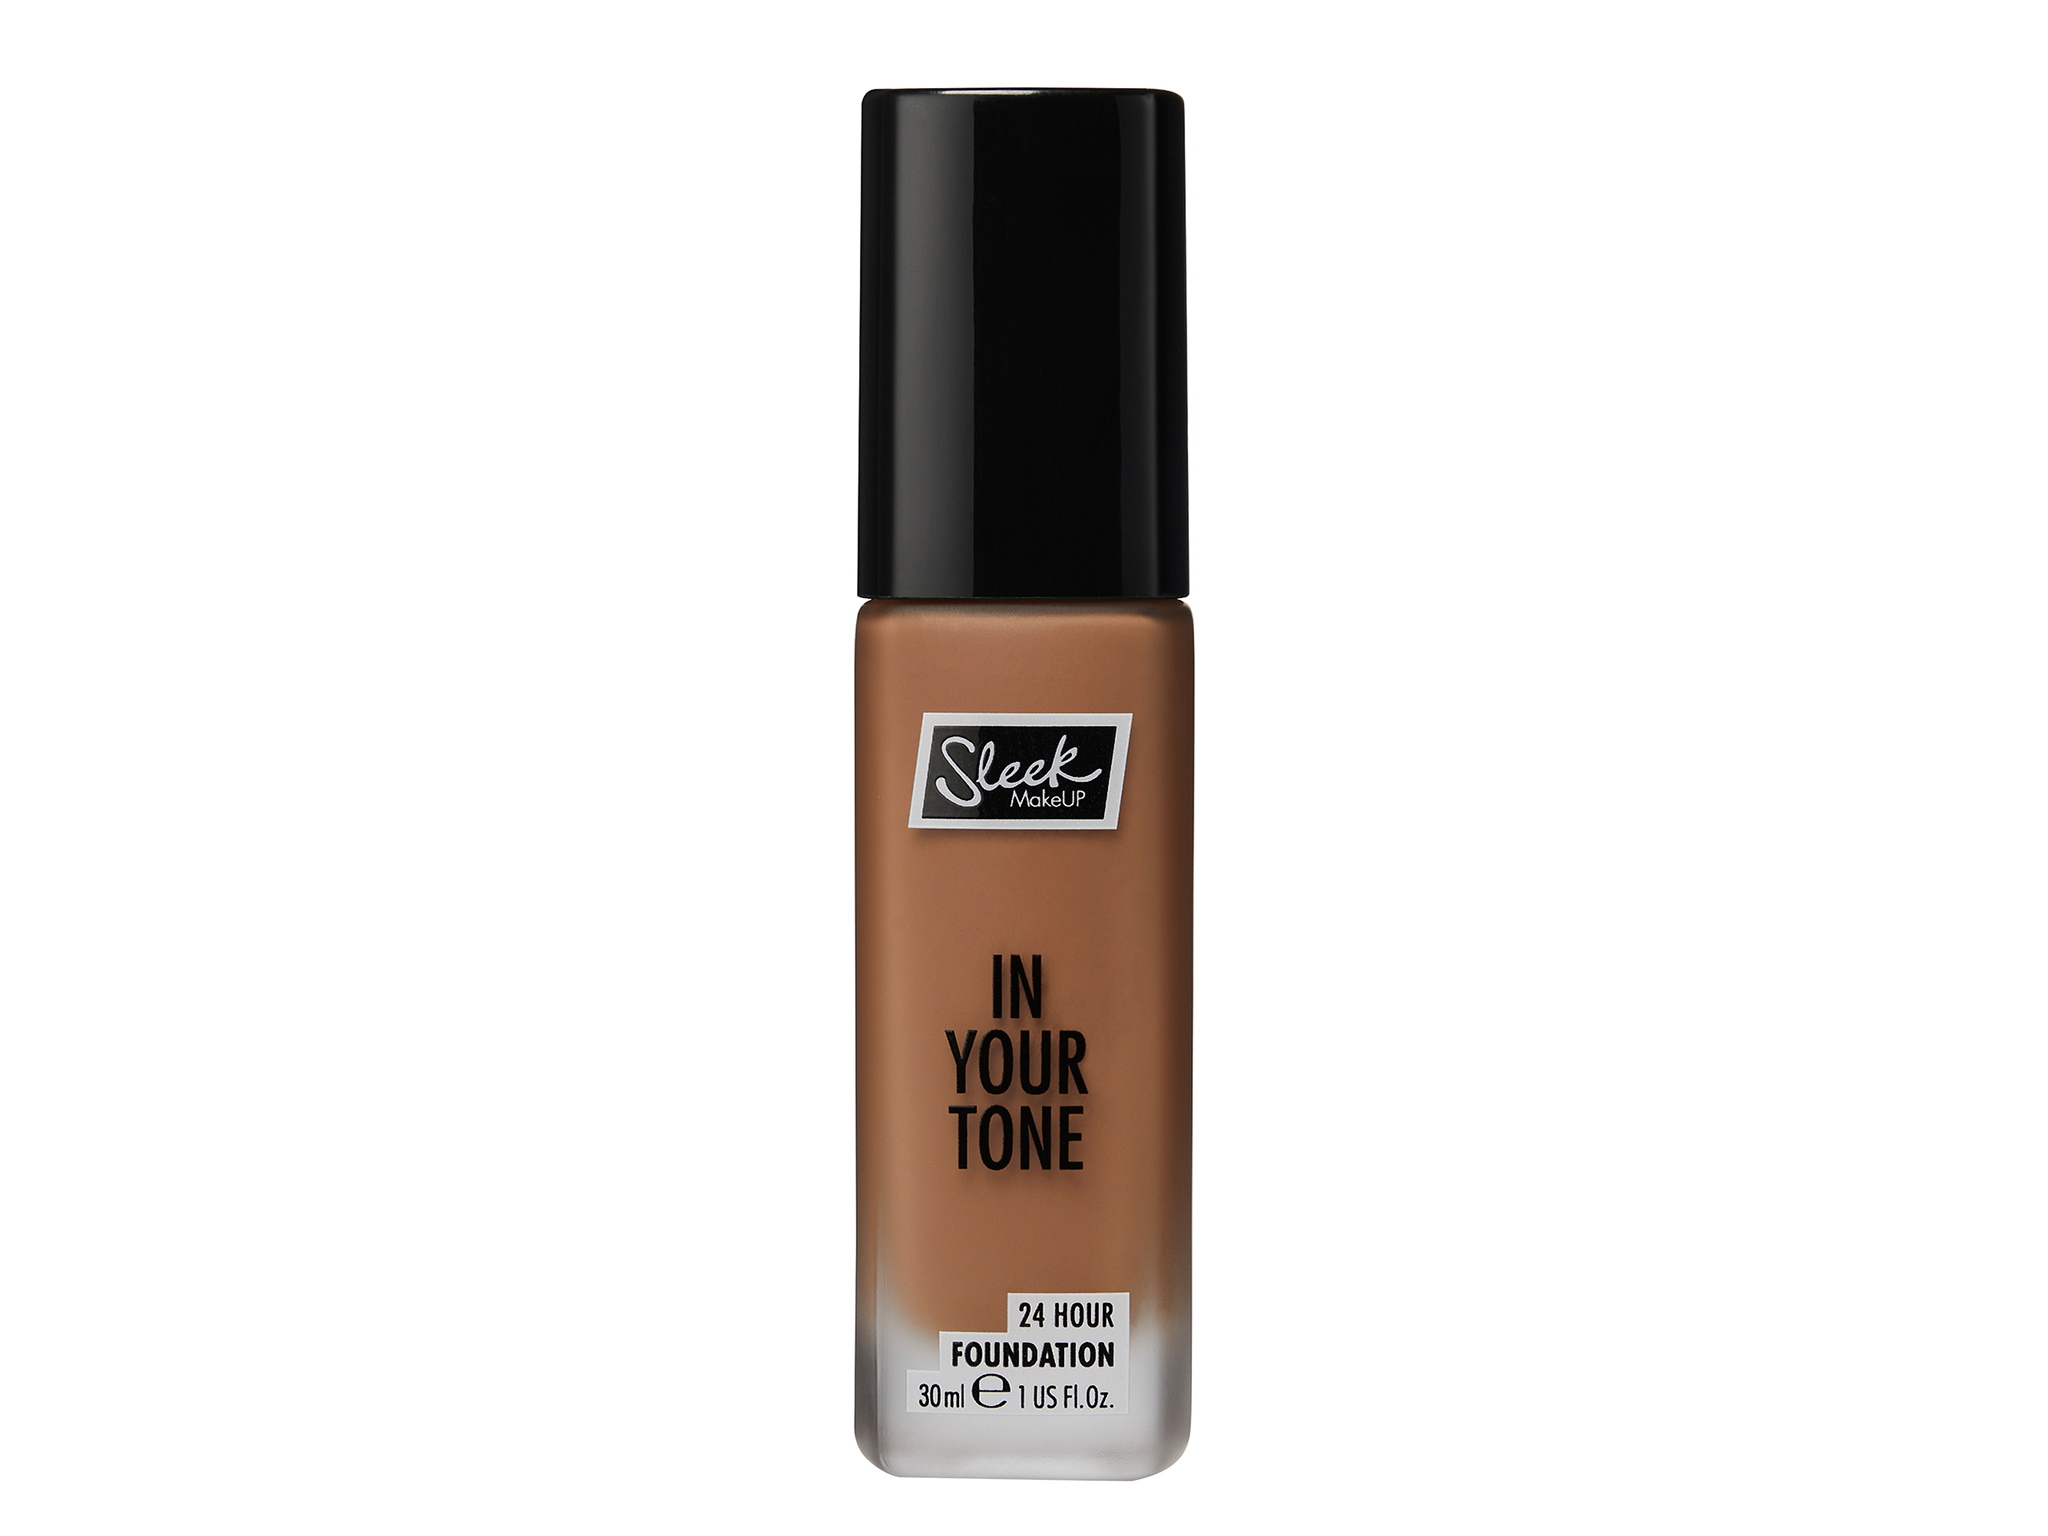 best foundation skin Sleek Makeup in your tone 24 hour foundation